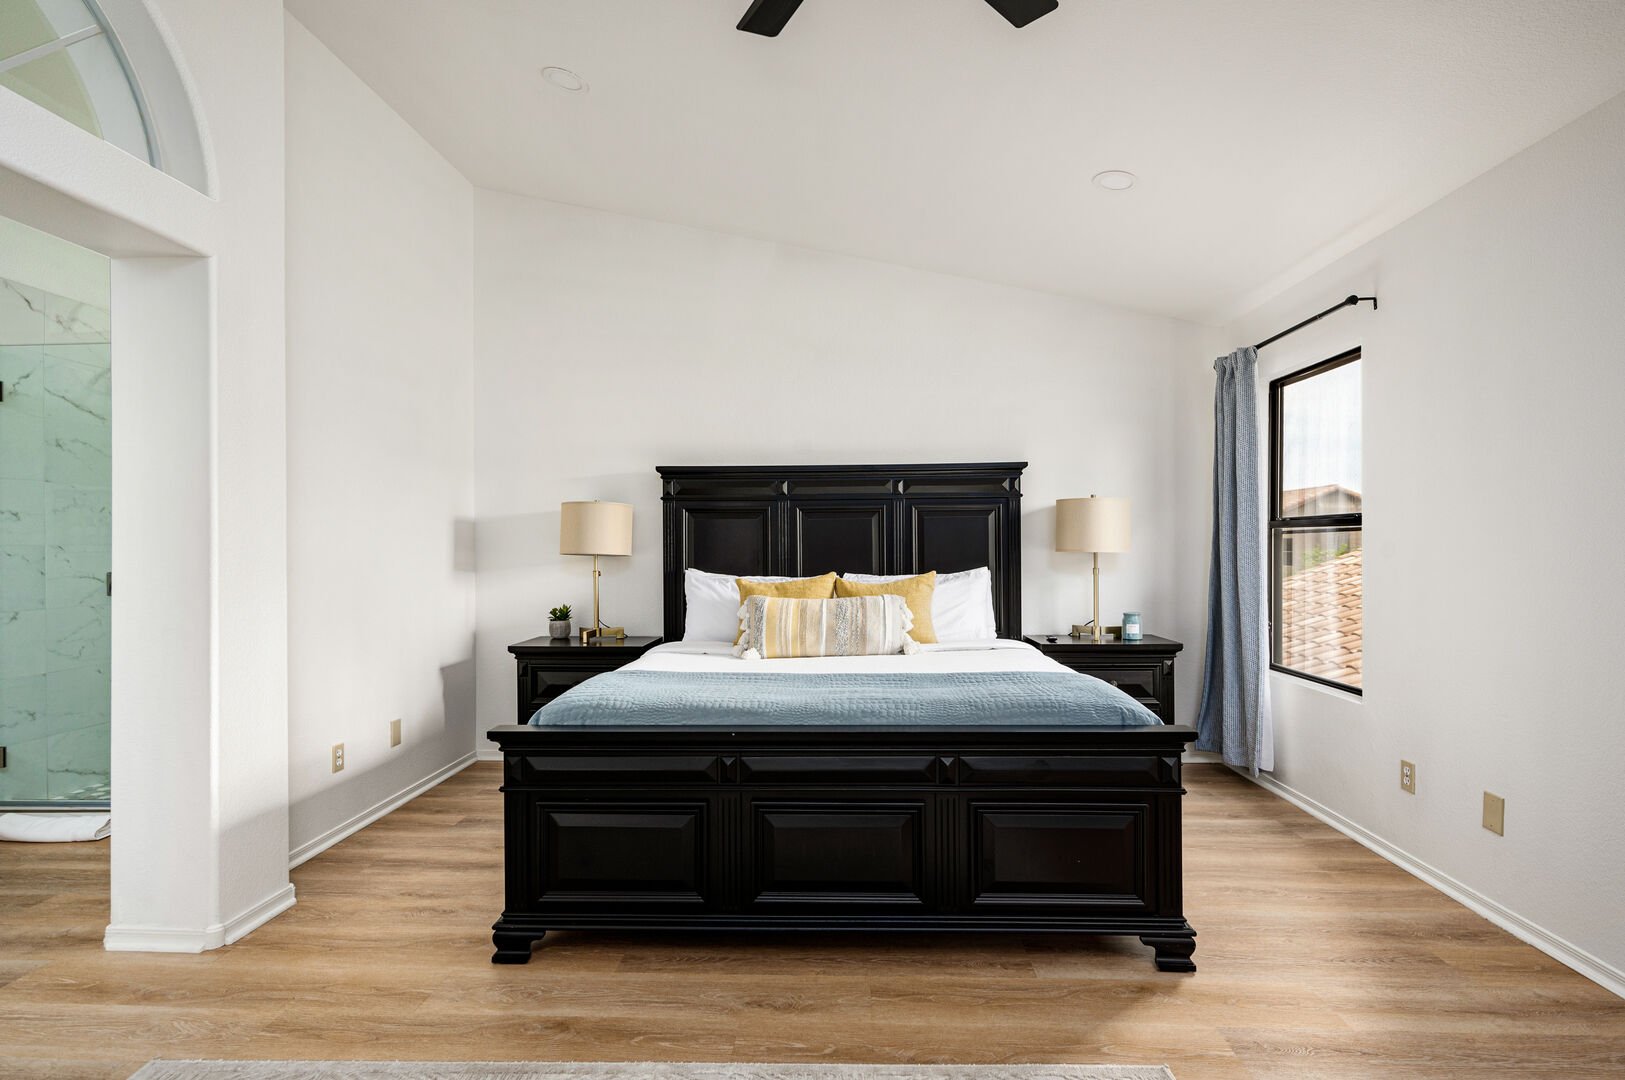 We love how spacious the Master bedroom is.